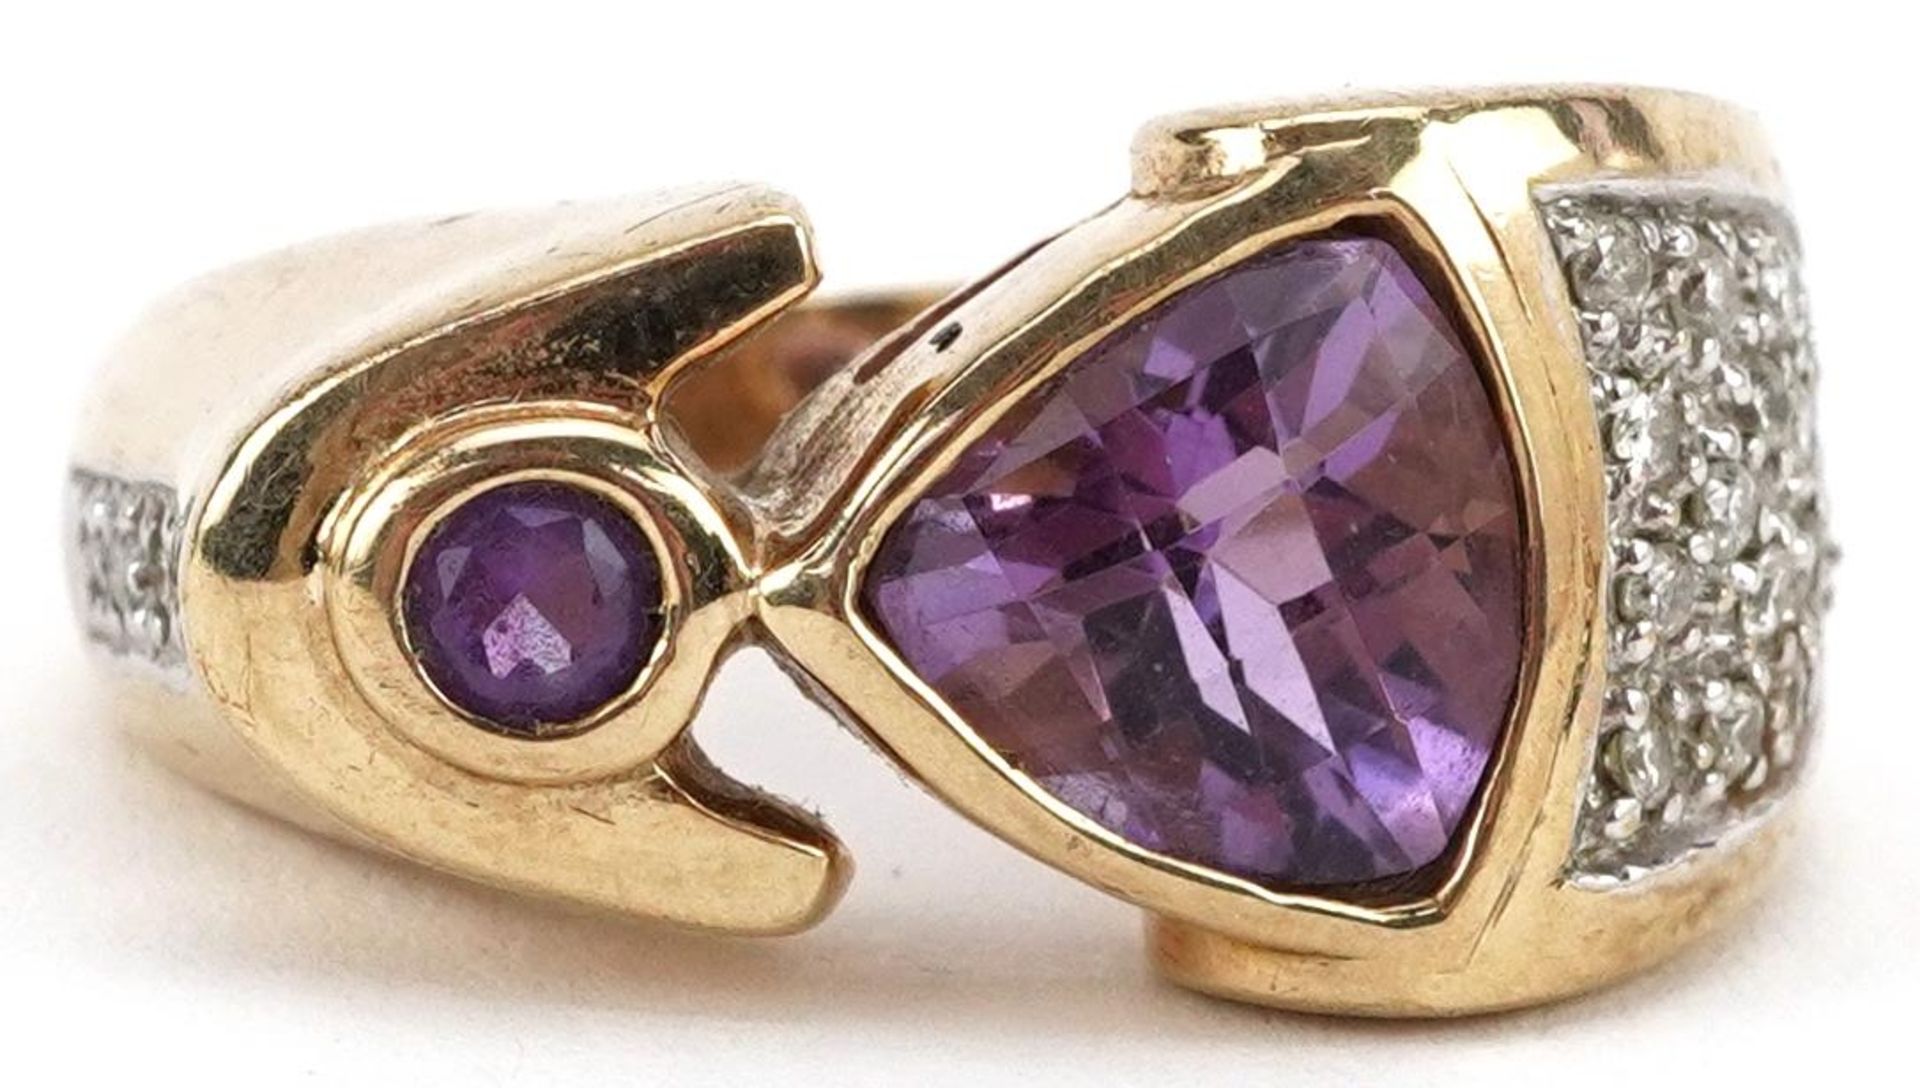 Modernist 9ct gold amethyst and diamond ring, size T, 13.6g